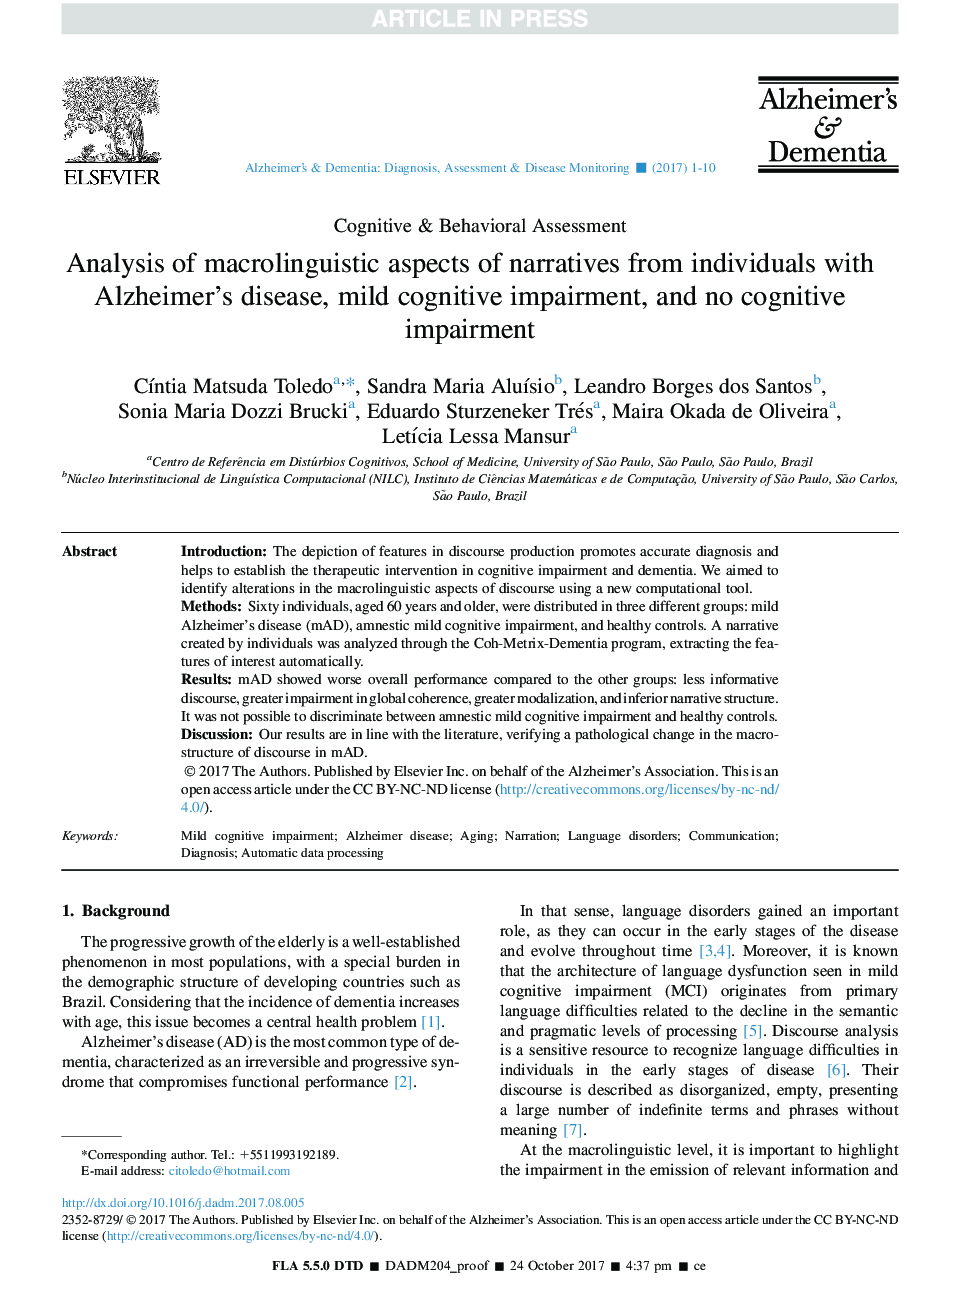 Analysis of macrolinguistic aspects of narratives from individuals with Alzheimer's disease, mild cognitive impairment, and no cognitive impairment